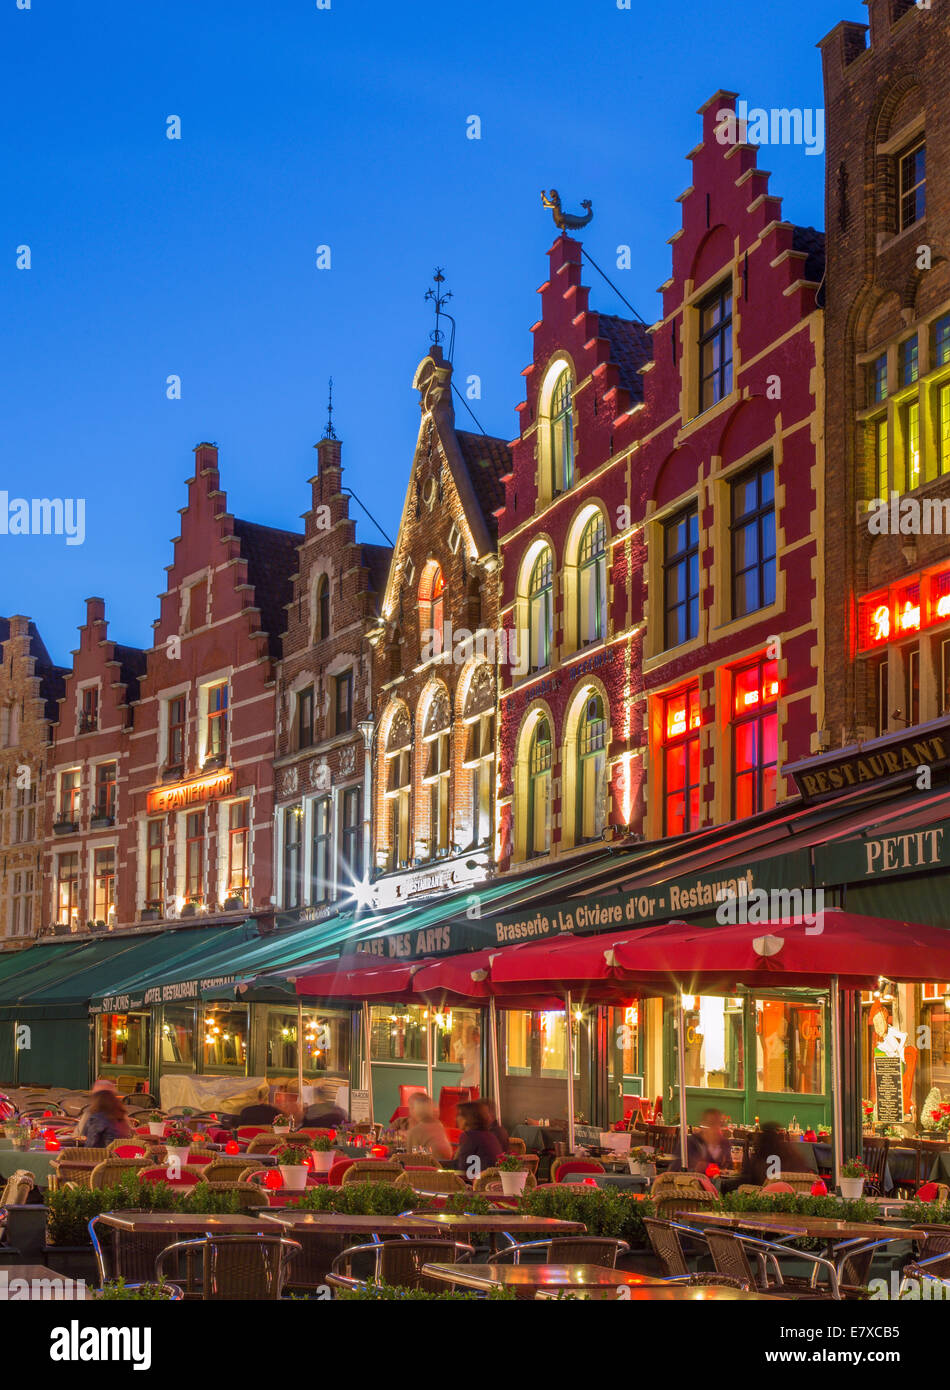 BRUGES, BELGIUM - JUNE 11, 2014: The houses of the Grote Markt square at dusk. Stock Photo